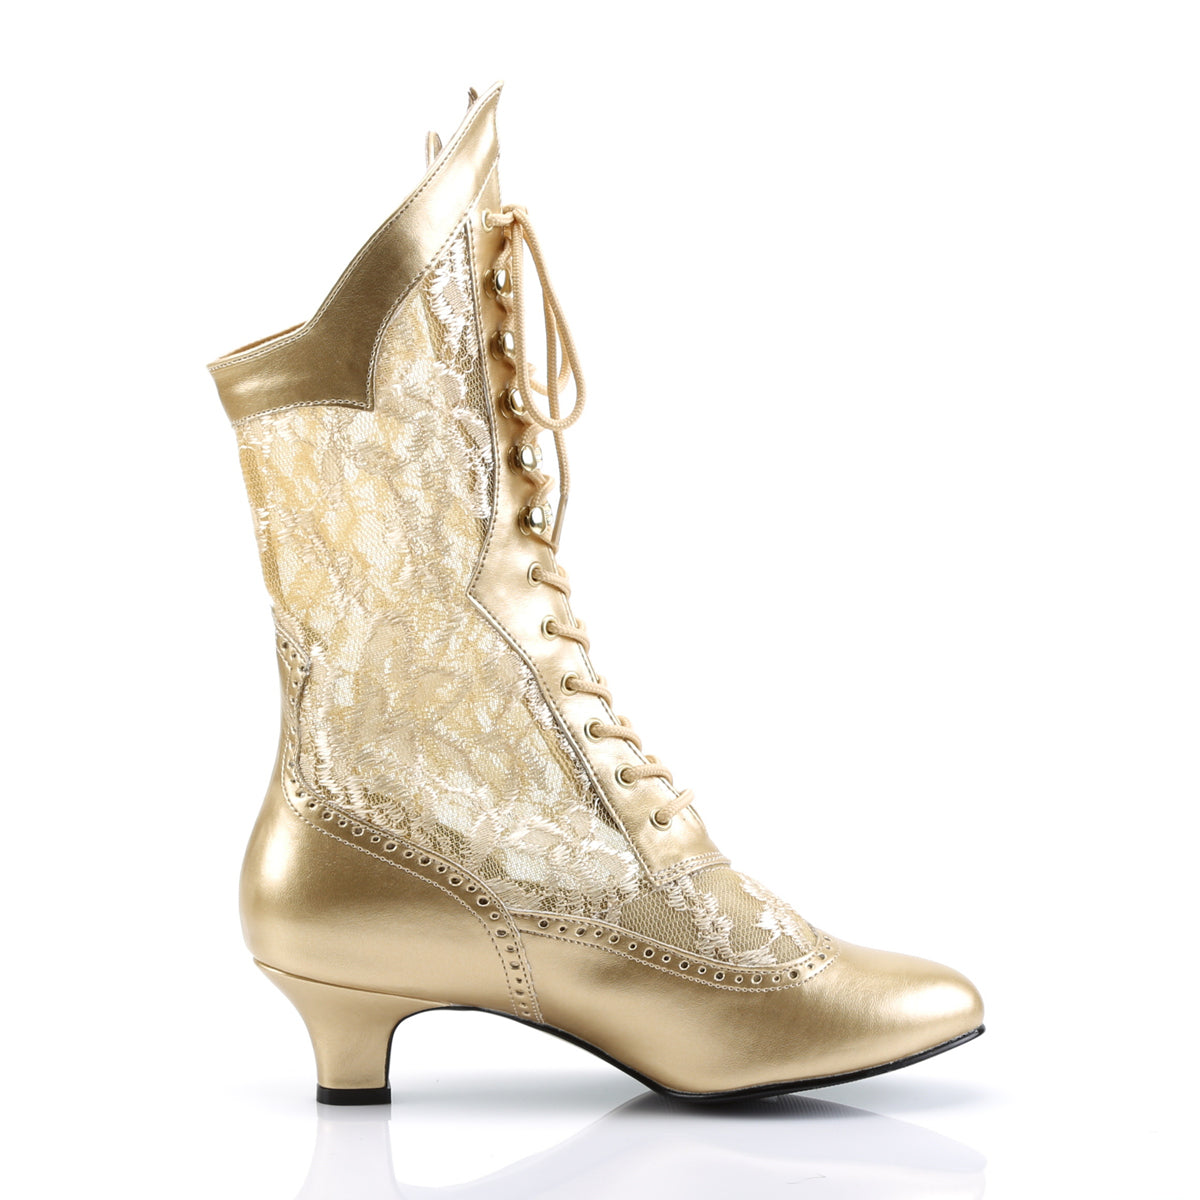 DAME-115 Black Ankle Boots Gold Multi view 2